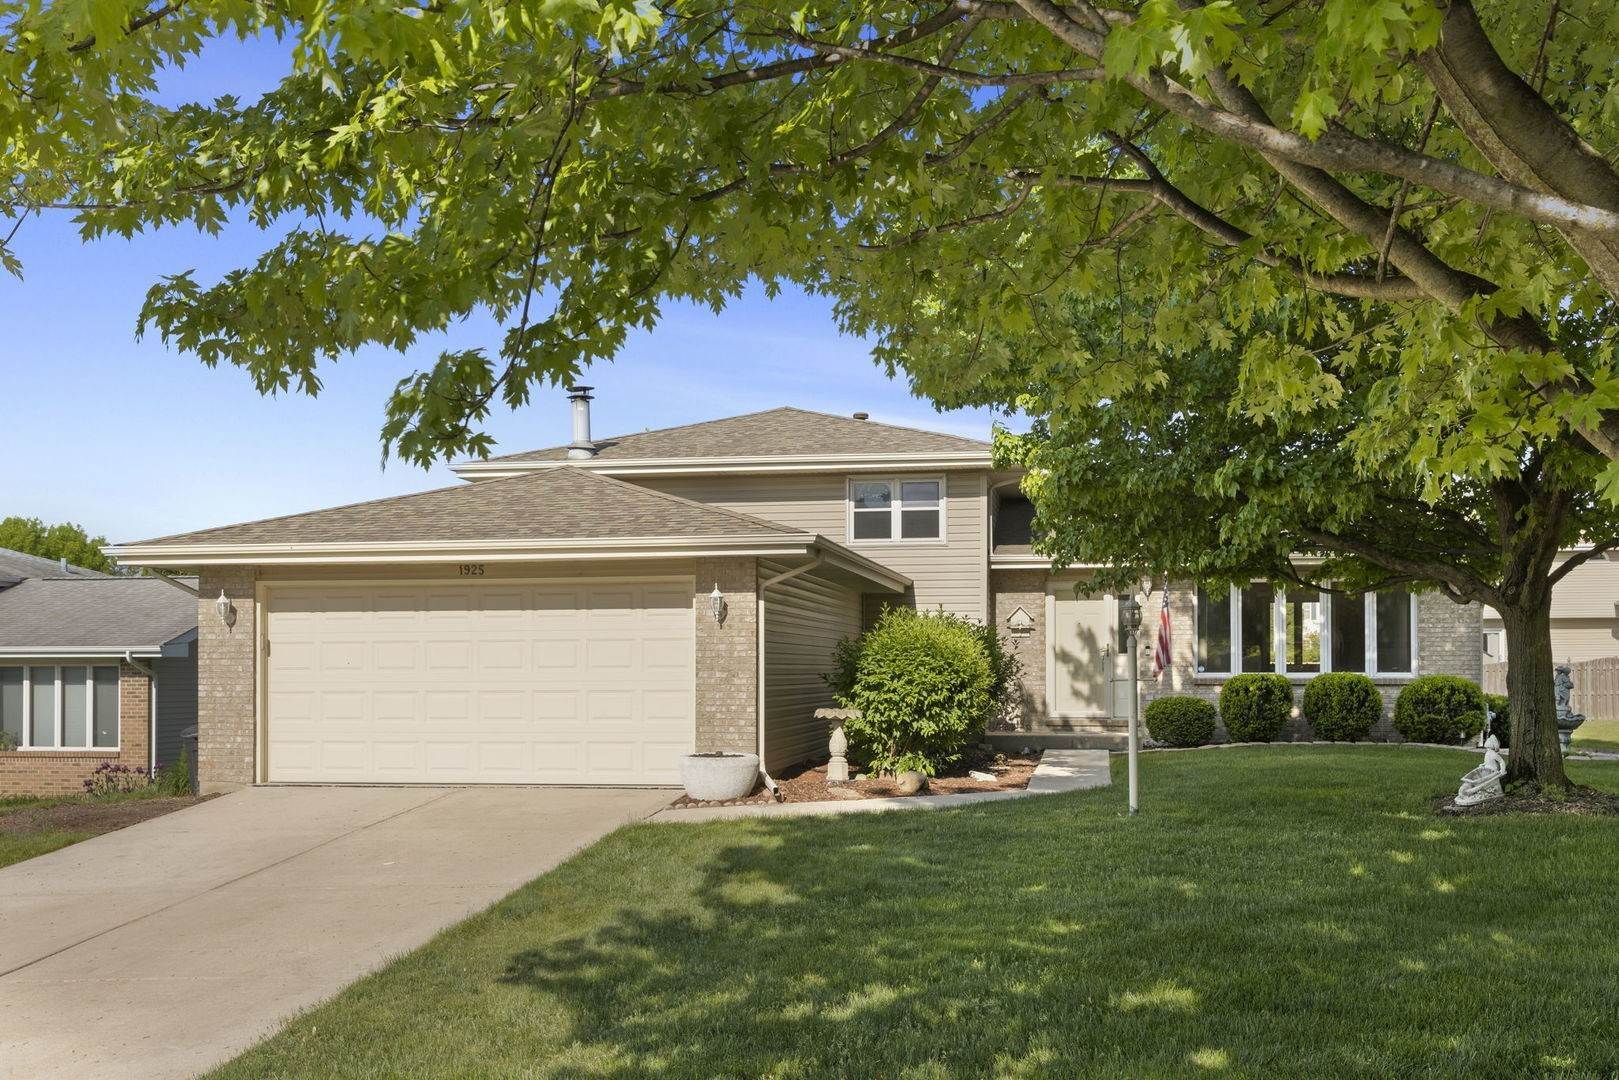 Single Family at Crest Hill, IL 60403